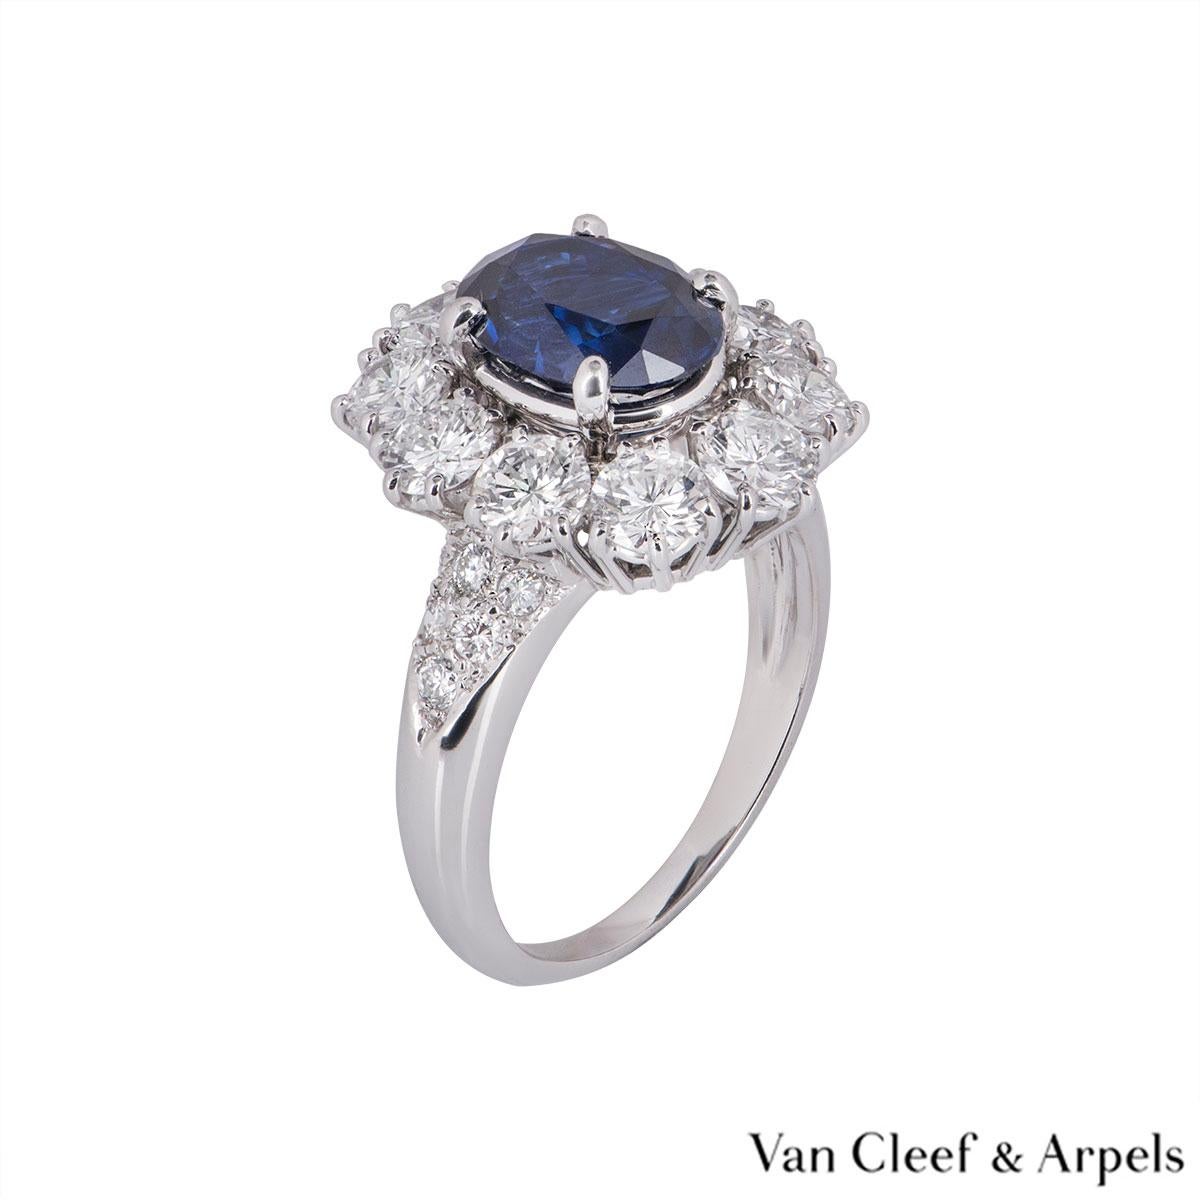 Women's Van Cleef & Arpels Sapphire and Diamond Engagement Cocktail Ring GIA Certified